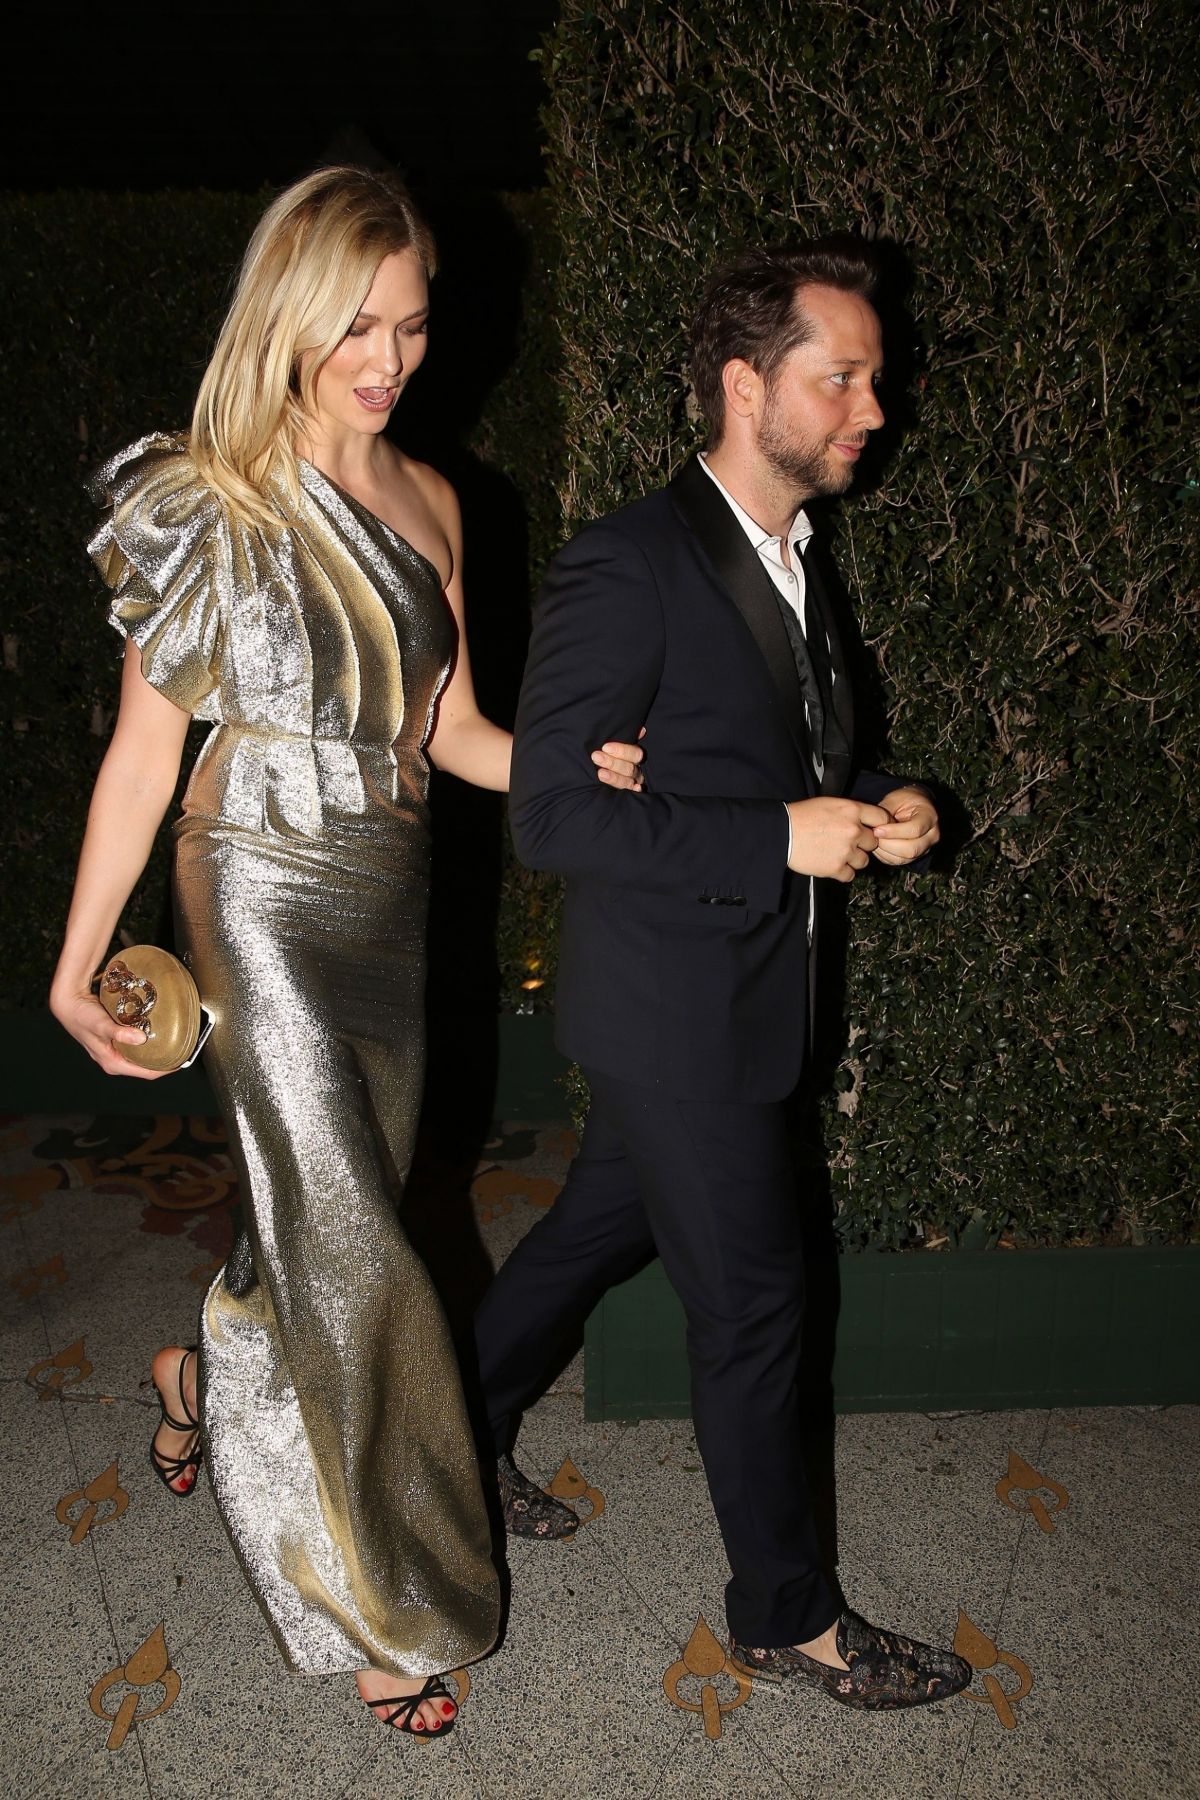 KARLIE KLOSS at Gwyneth Paltrow and Brad Falchuk’s Engagement Party in Los Angeles ...1200 x 1800